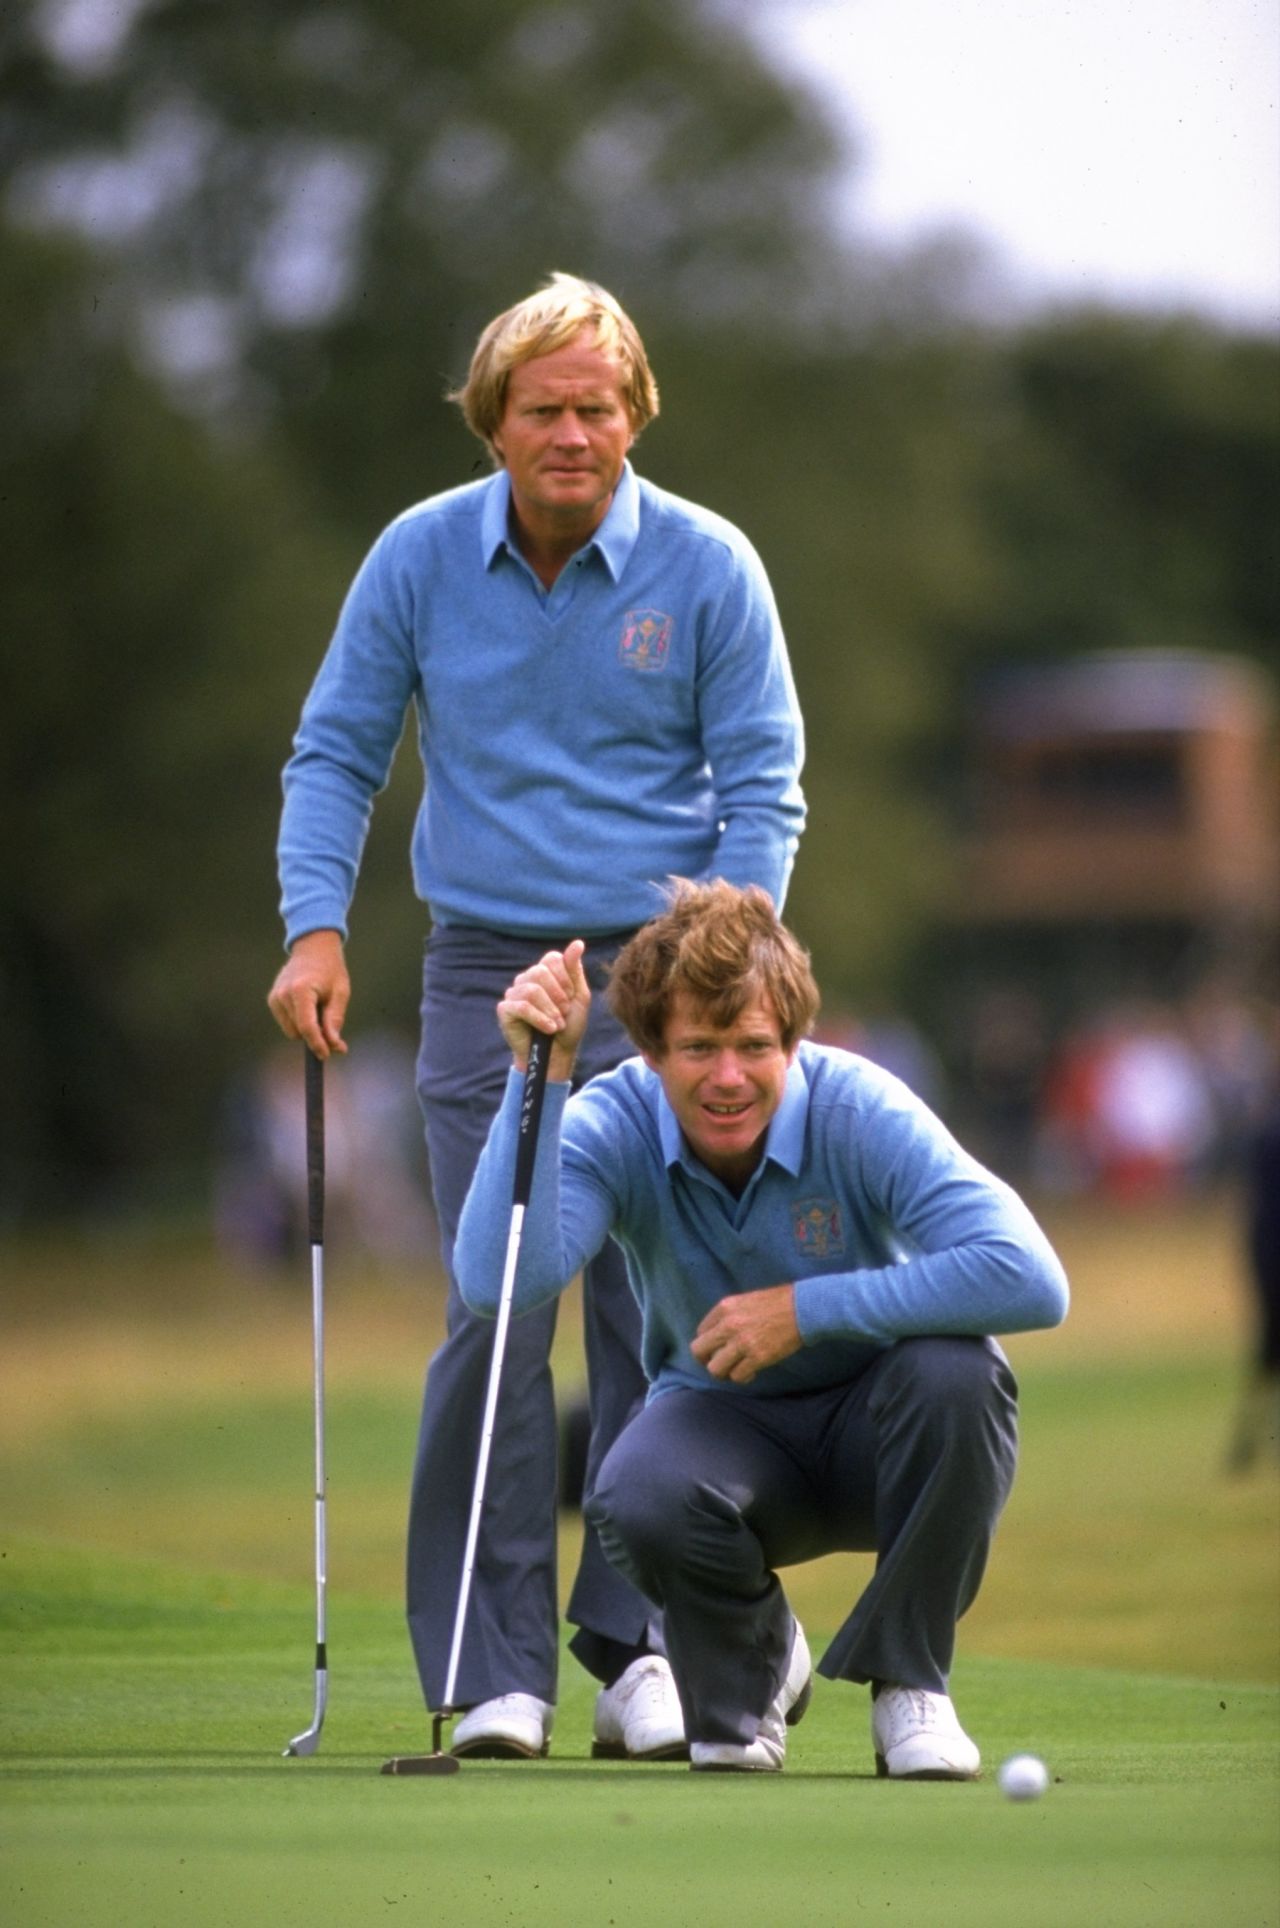 Nicklaus and Watson fought plenty of battles against each other but they also came together as team-mates in the 1981 Ryder Cup at Walton Heath in England, winning all three of their matches together as the US won 18.5 - 9.5.  